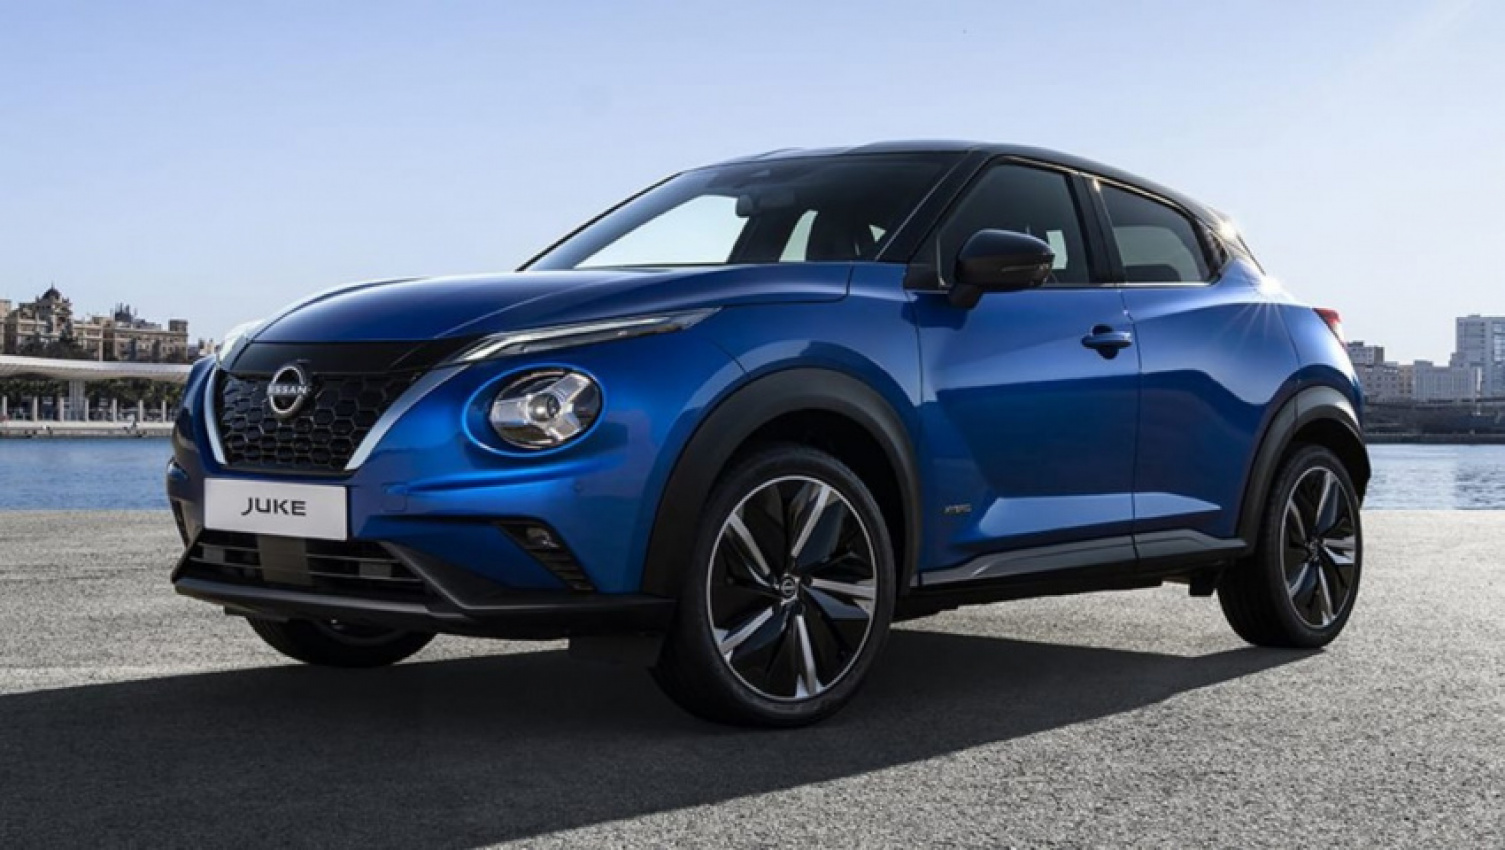 autos, cars, nissan, toyota, hybrid cars, industry news, nissan juke, nissan juke 2022, nissan news, nissan suv range, showroom news, toyota yaris, toyota yaris cross, does the toyota yaris cross finally have some competition? 2022 nissan juke hybrid revealed as frugal and funky light suv